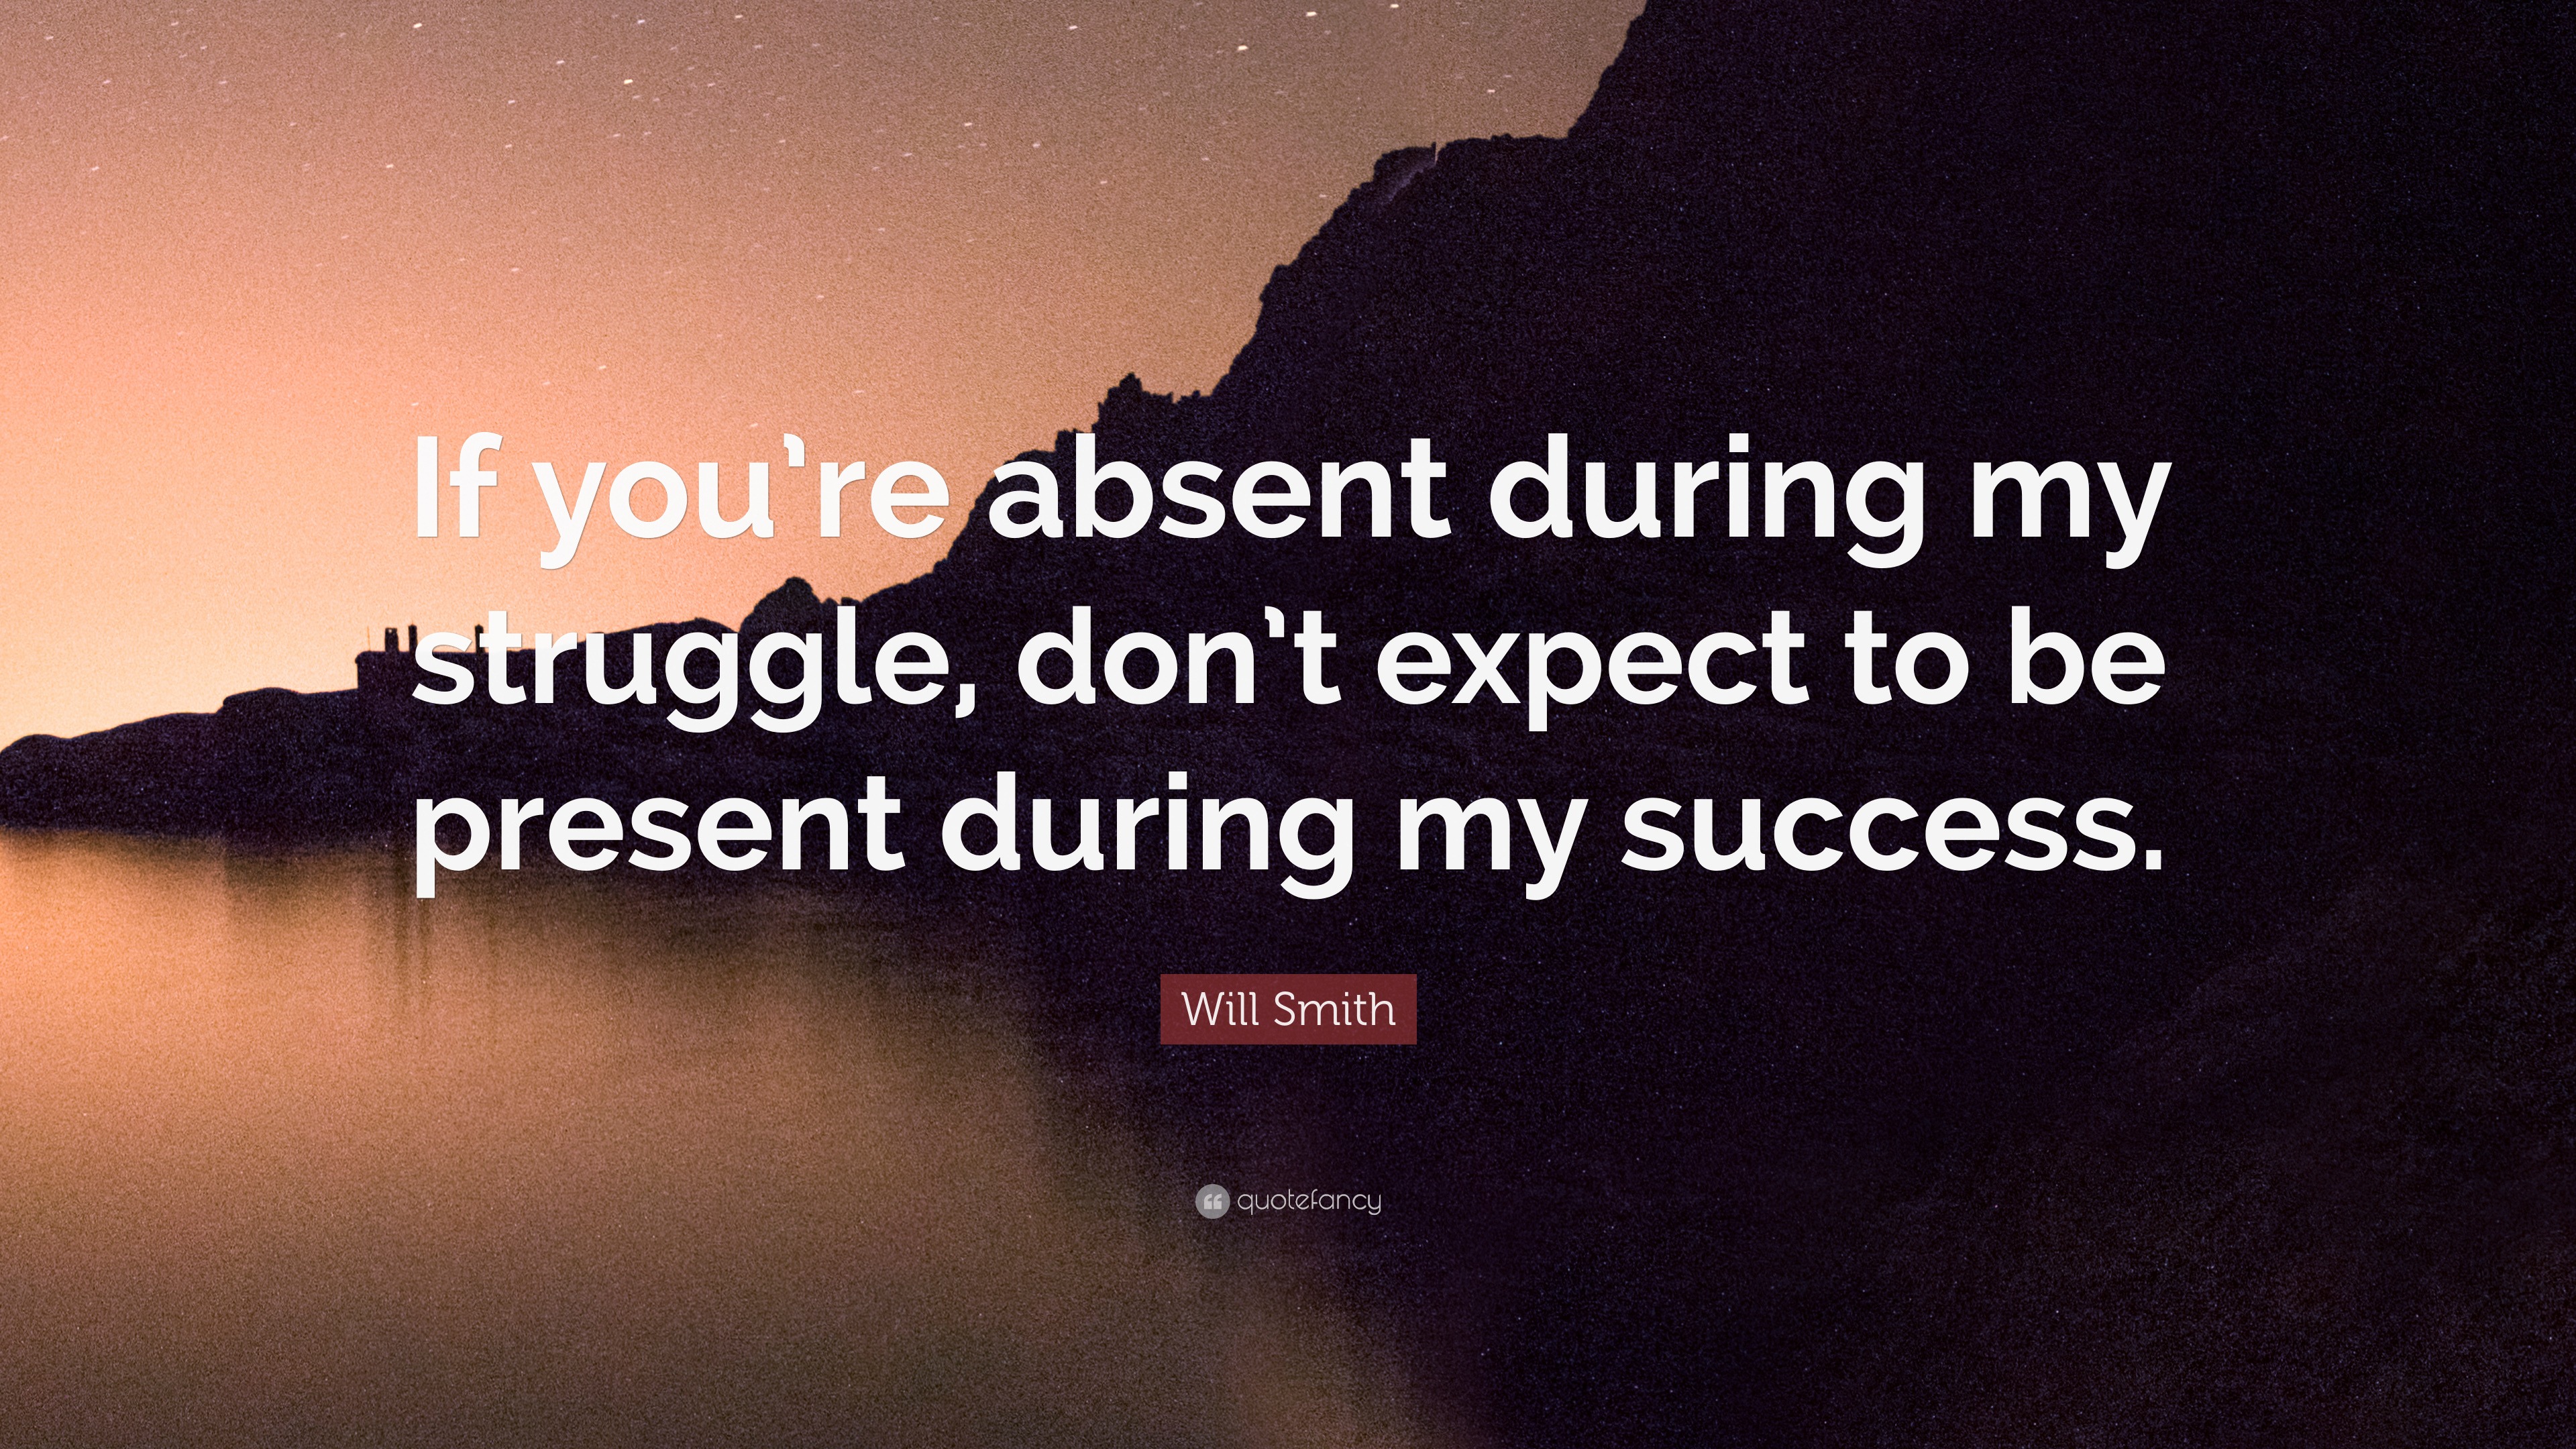 Will Smith Quote “If you re absent during my struggle don